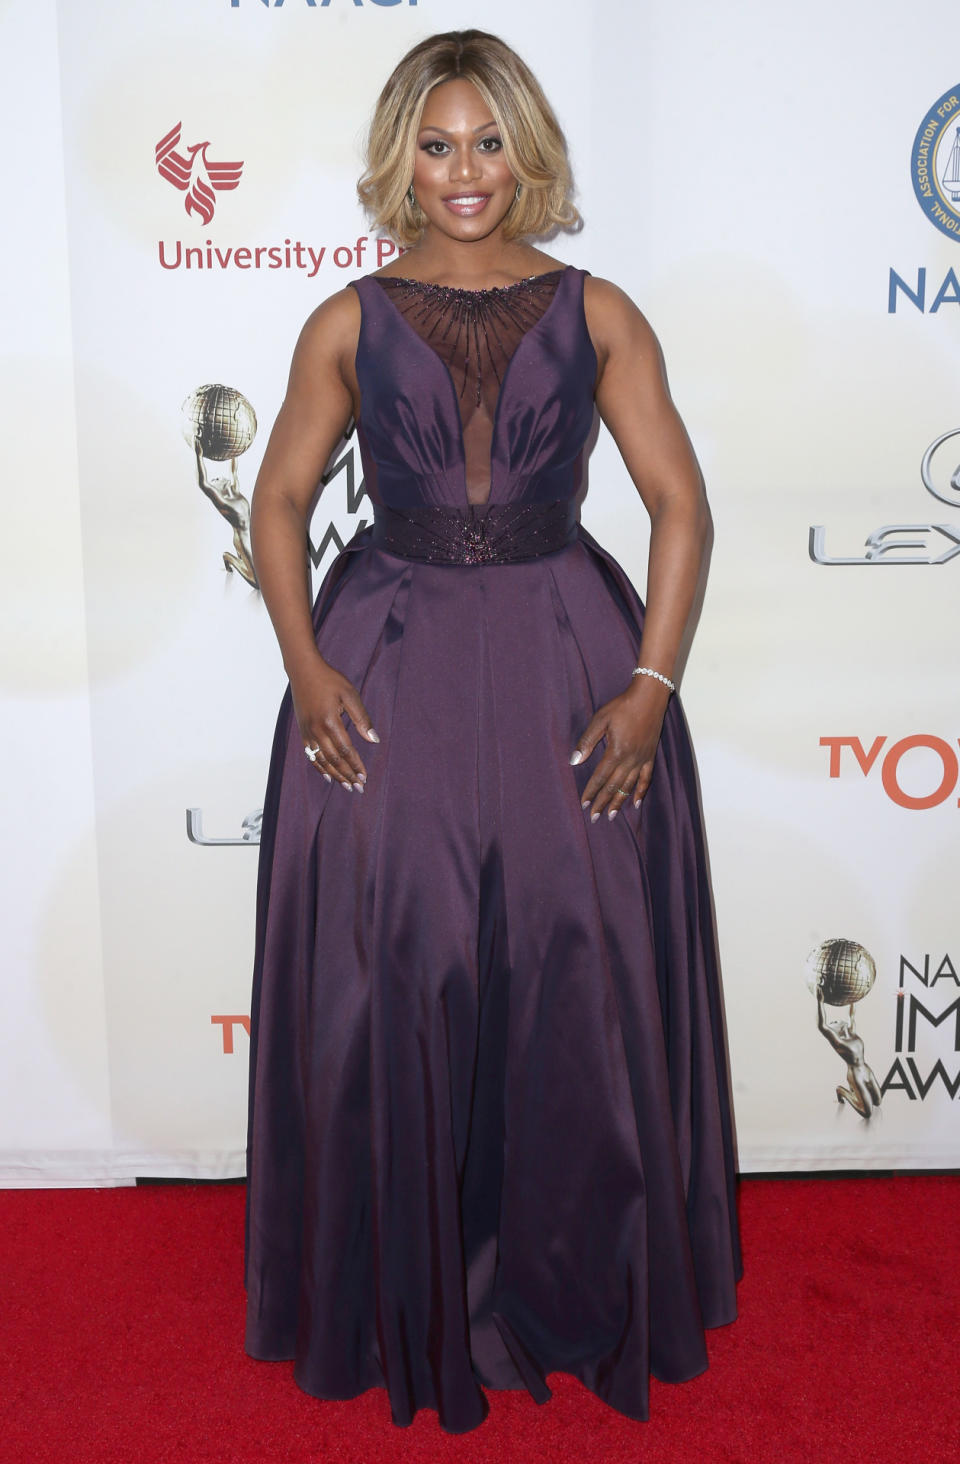 Laverne Cox at the 46th Annual NAACP Image Awards